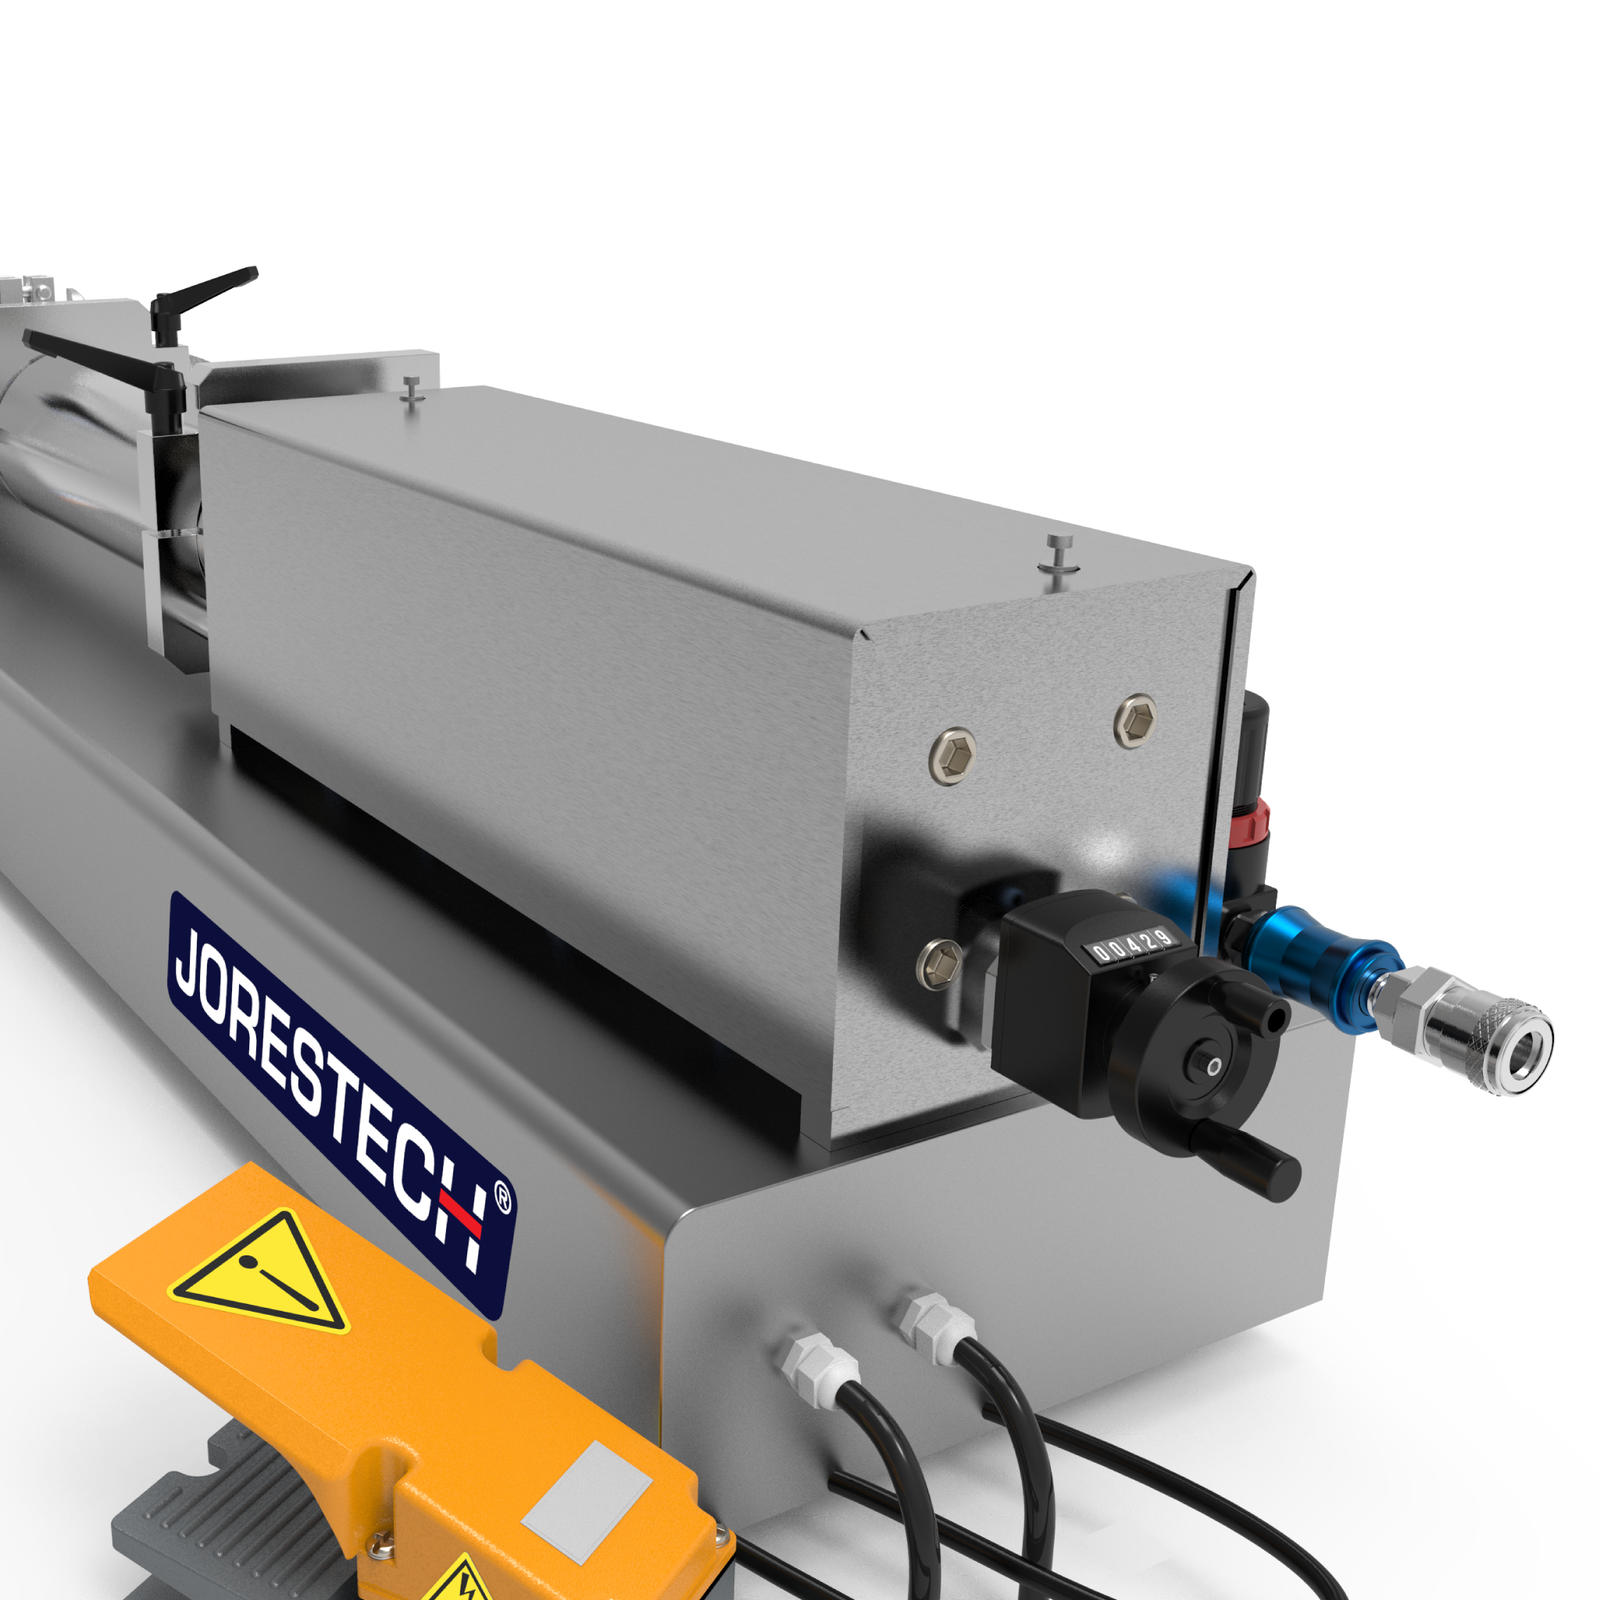 Low viscosity JORES TECHNOLOGIES® liquid filling machine shown from the back. The fill volume adjuster, main input hose, foot pedal, and compressed air connector can be easily appreciated.